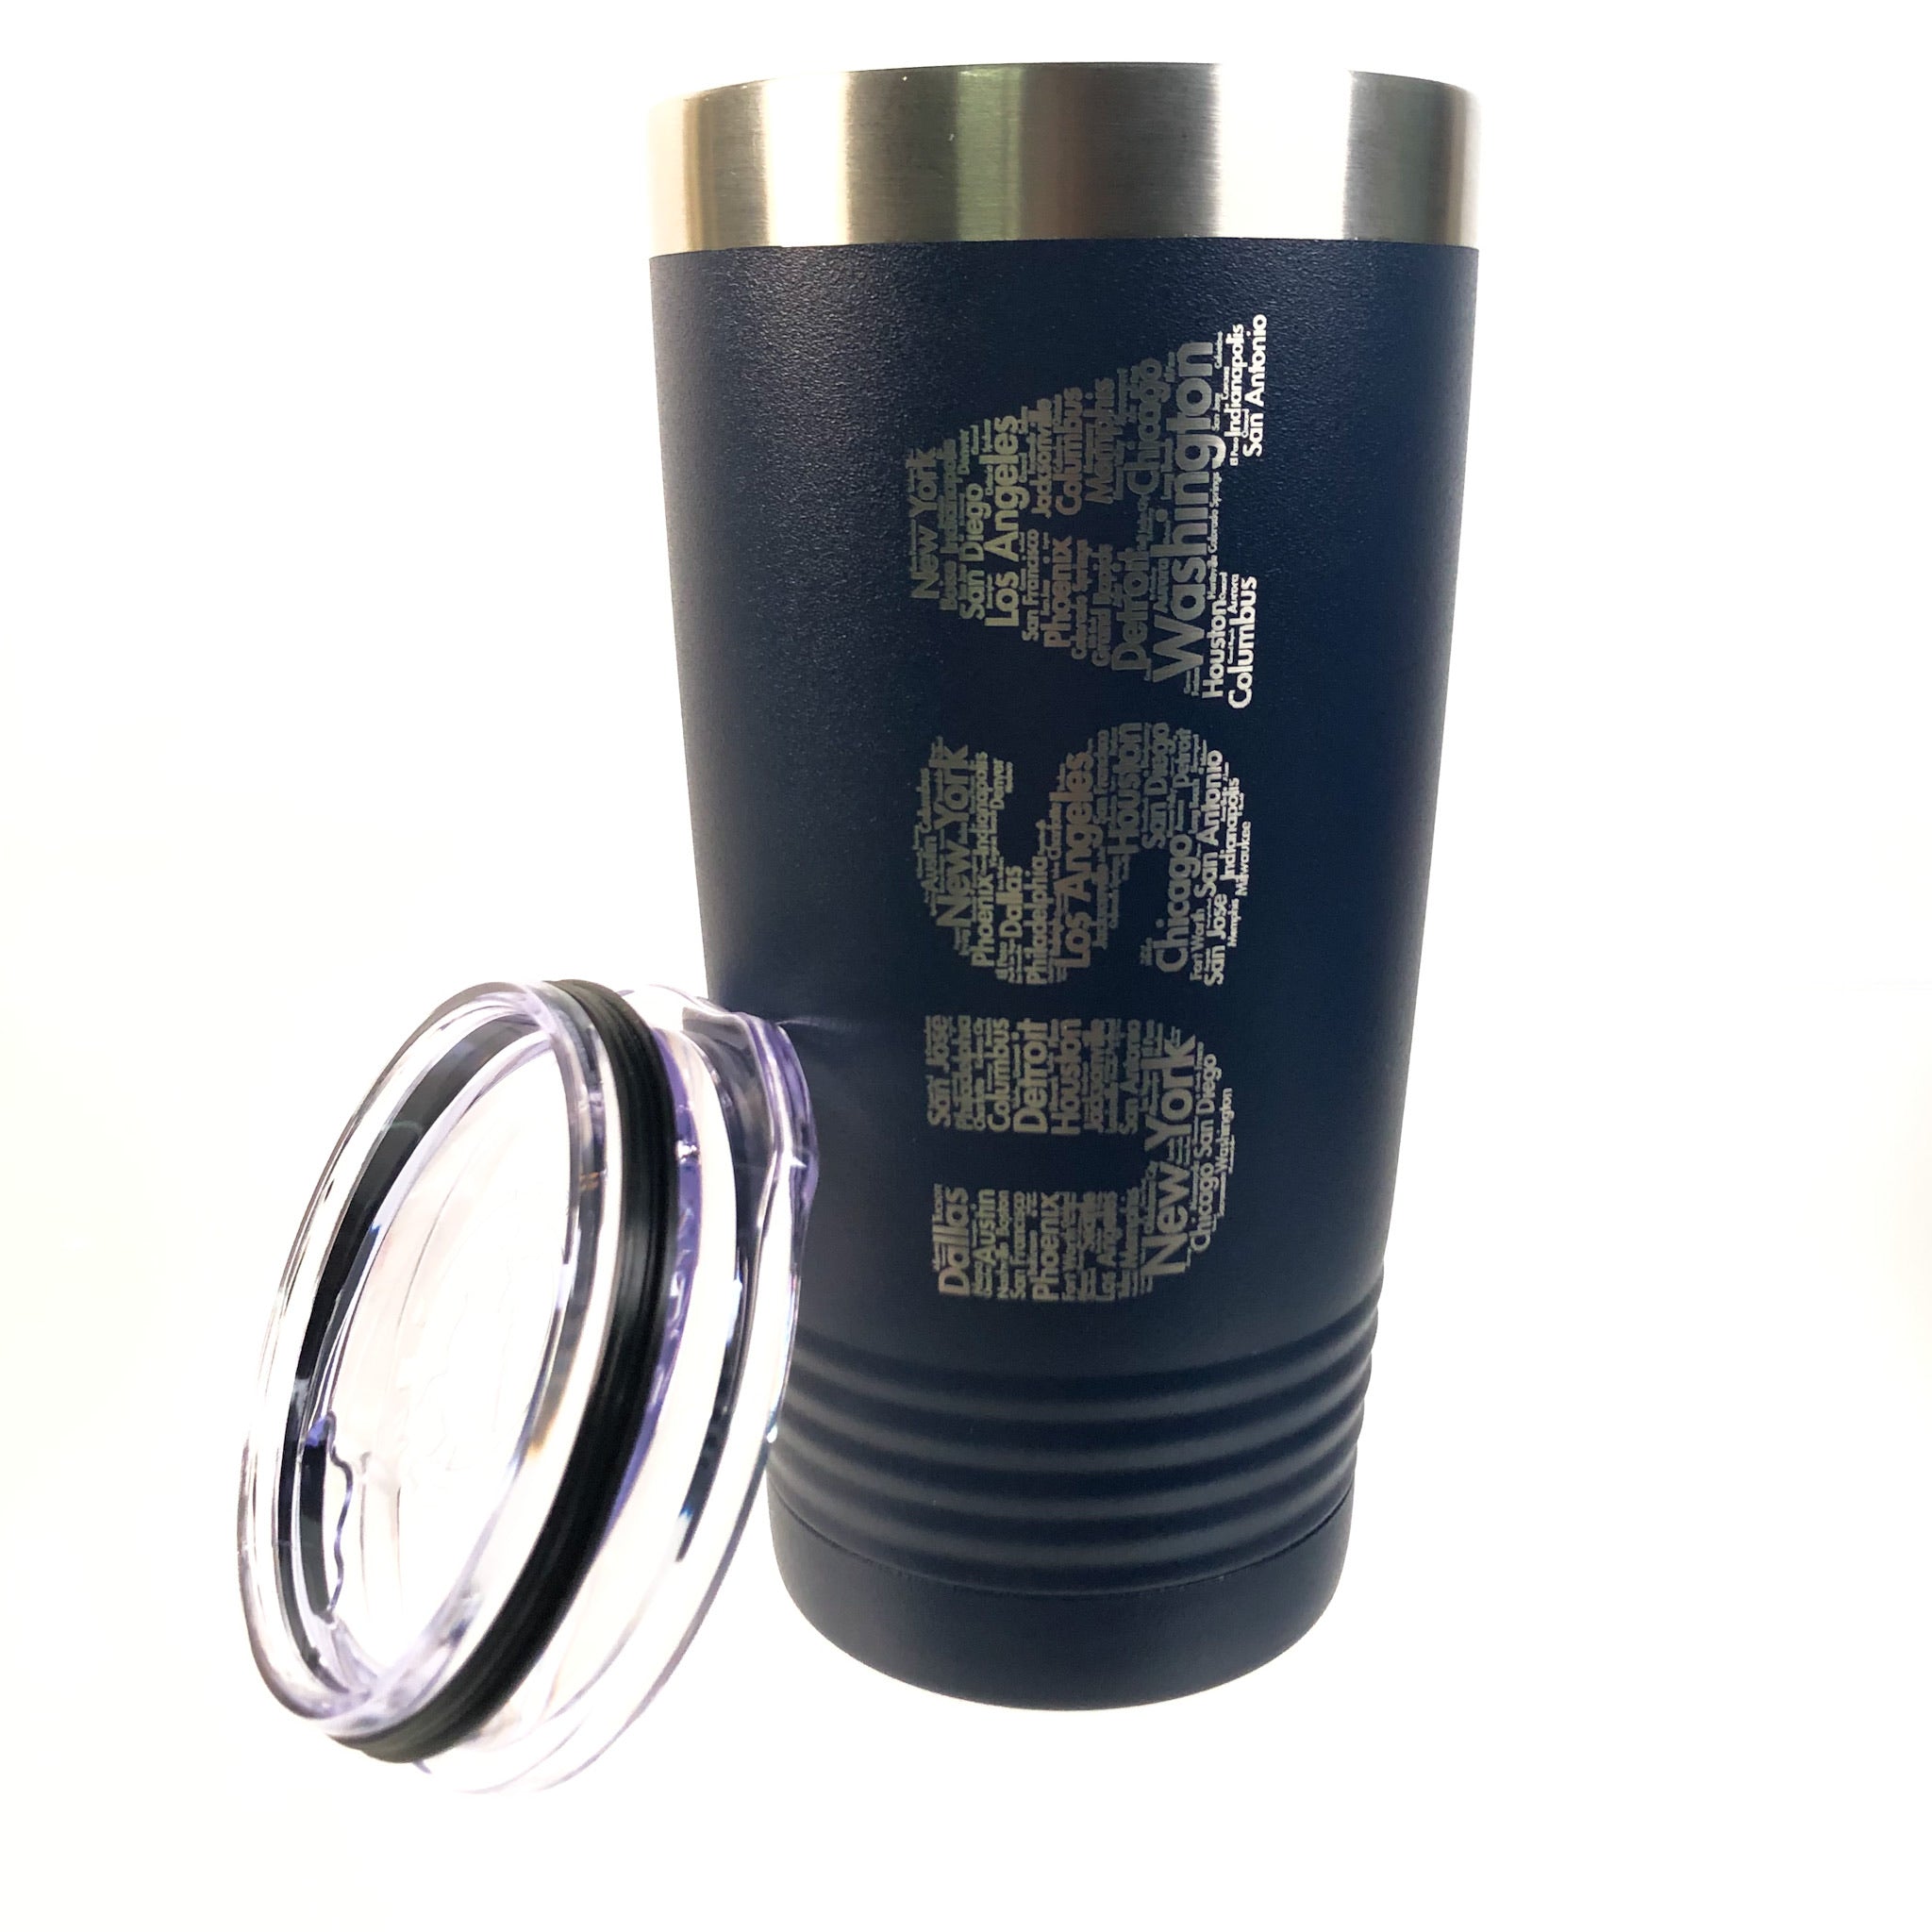 NEW Powder Coated Stainless Steel USA Engraved Travel Tumbler